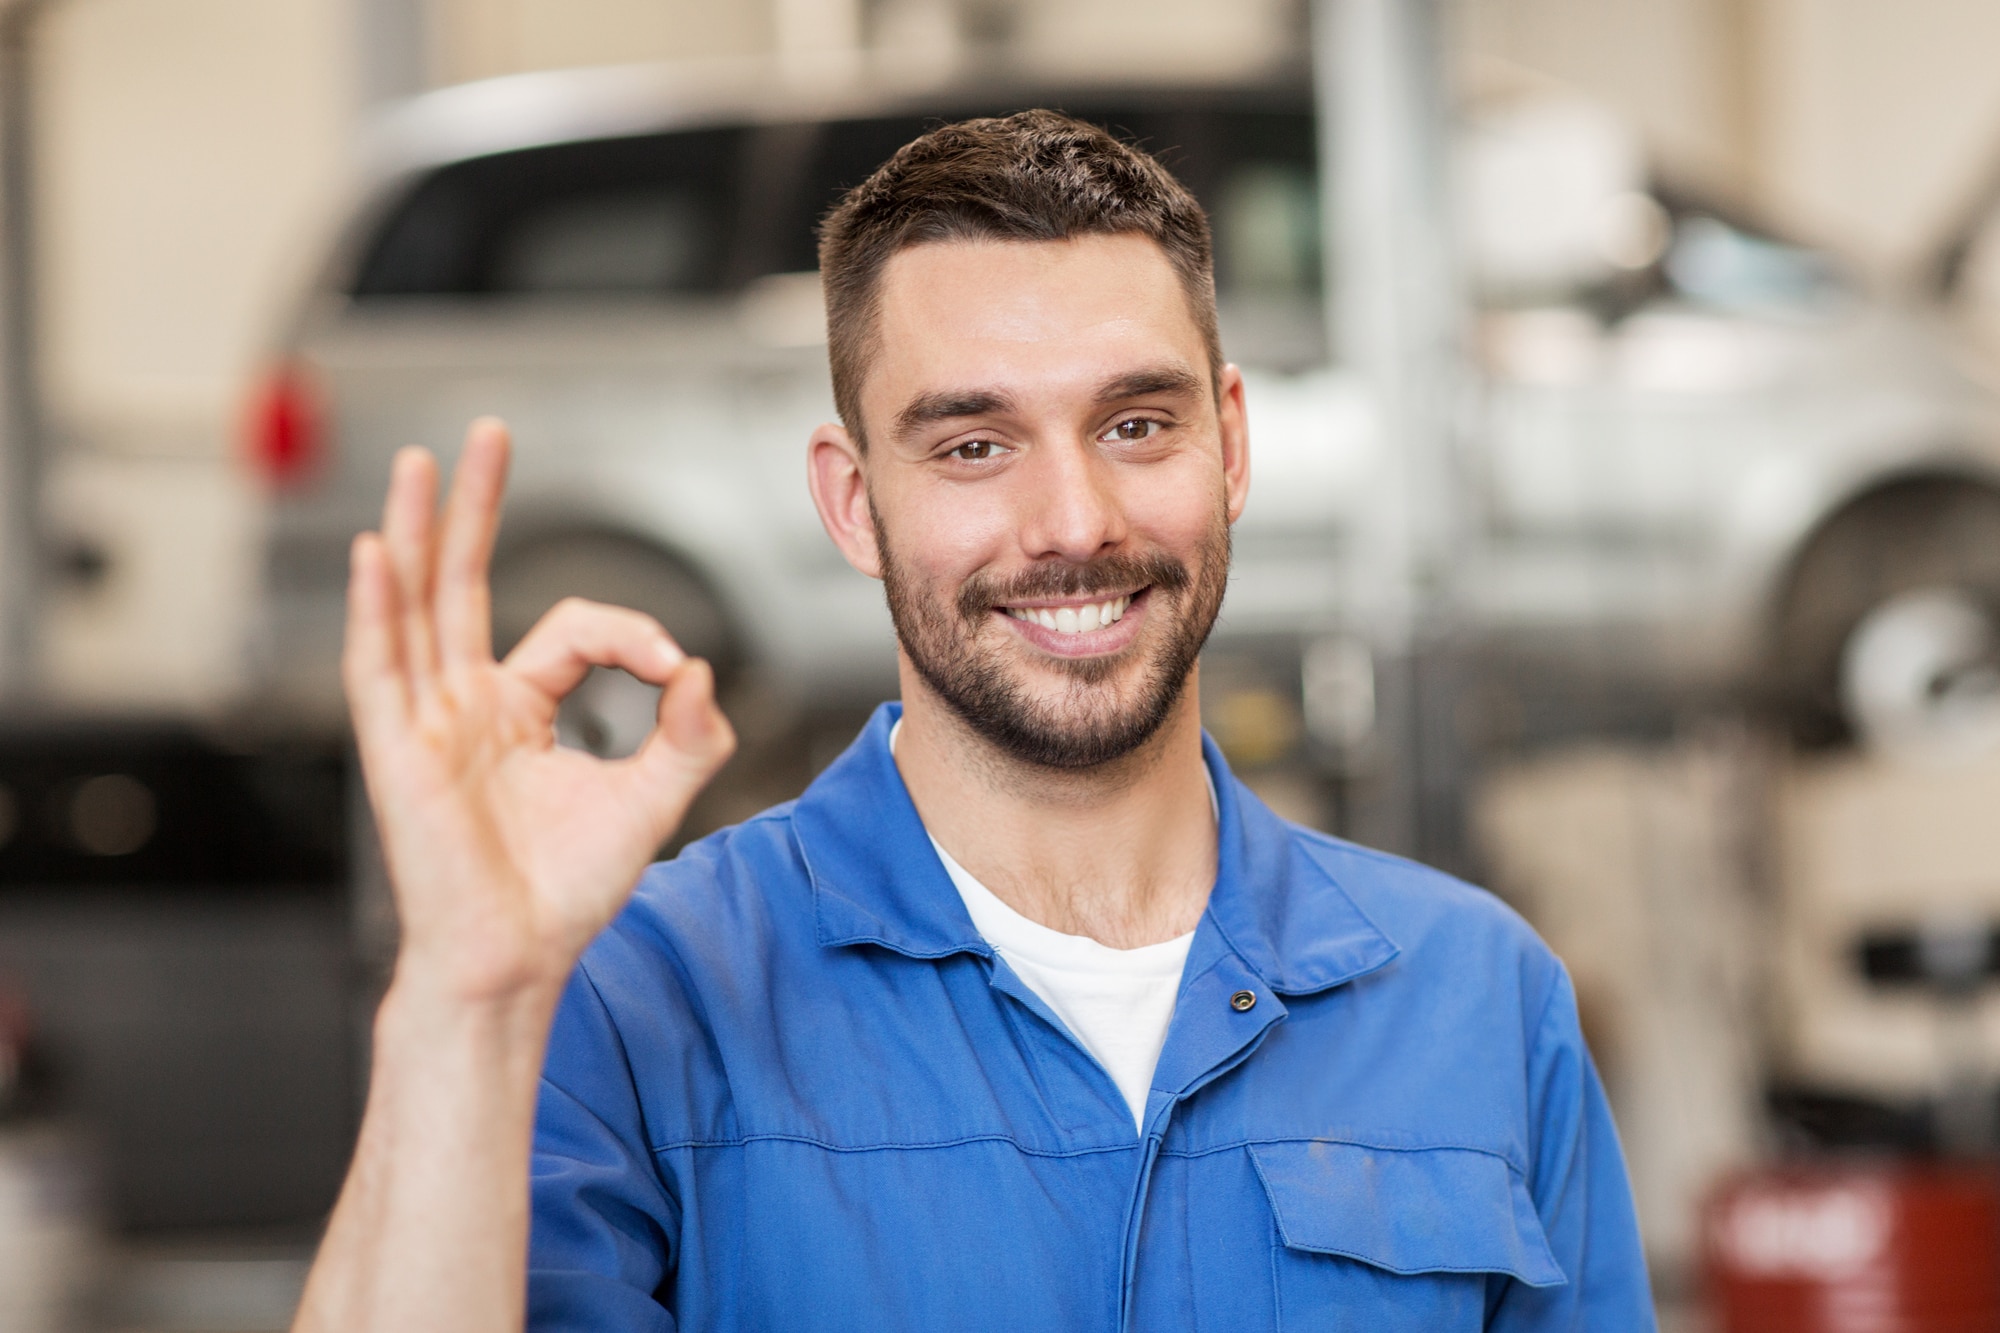 Mechanic in blue overalls smiling and giving all good sign with hand